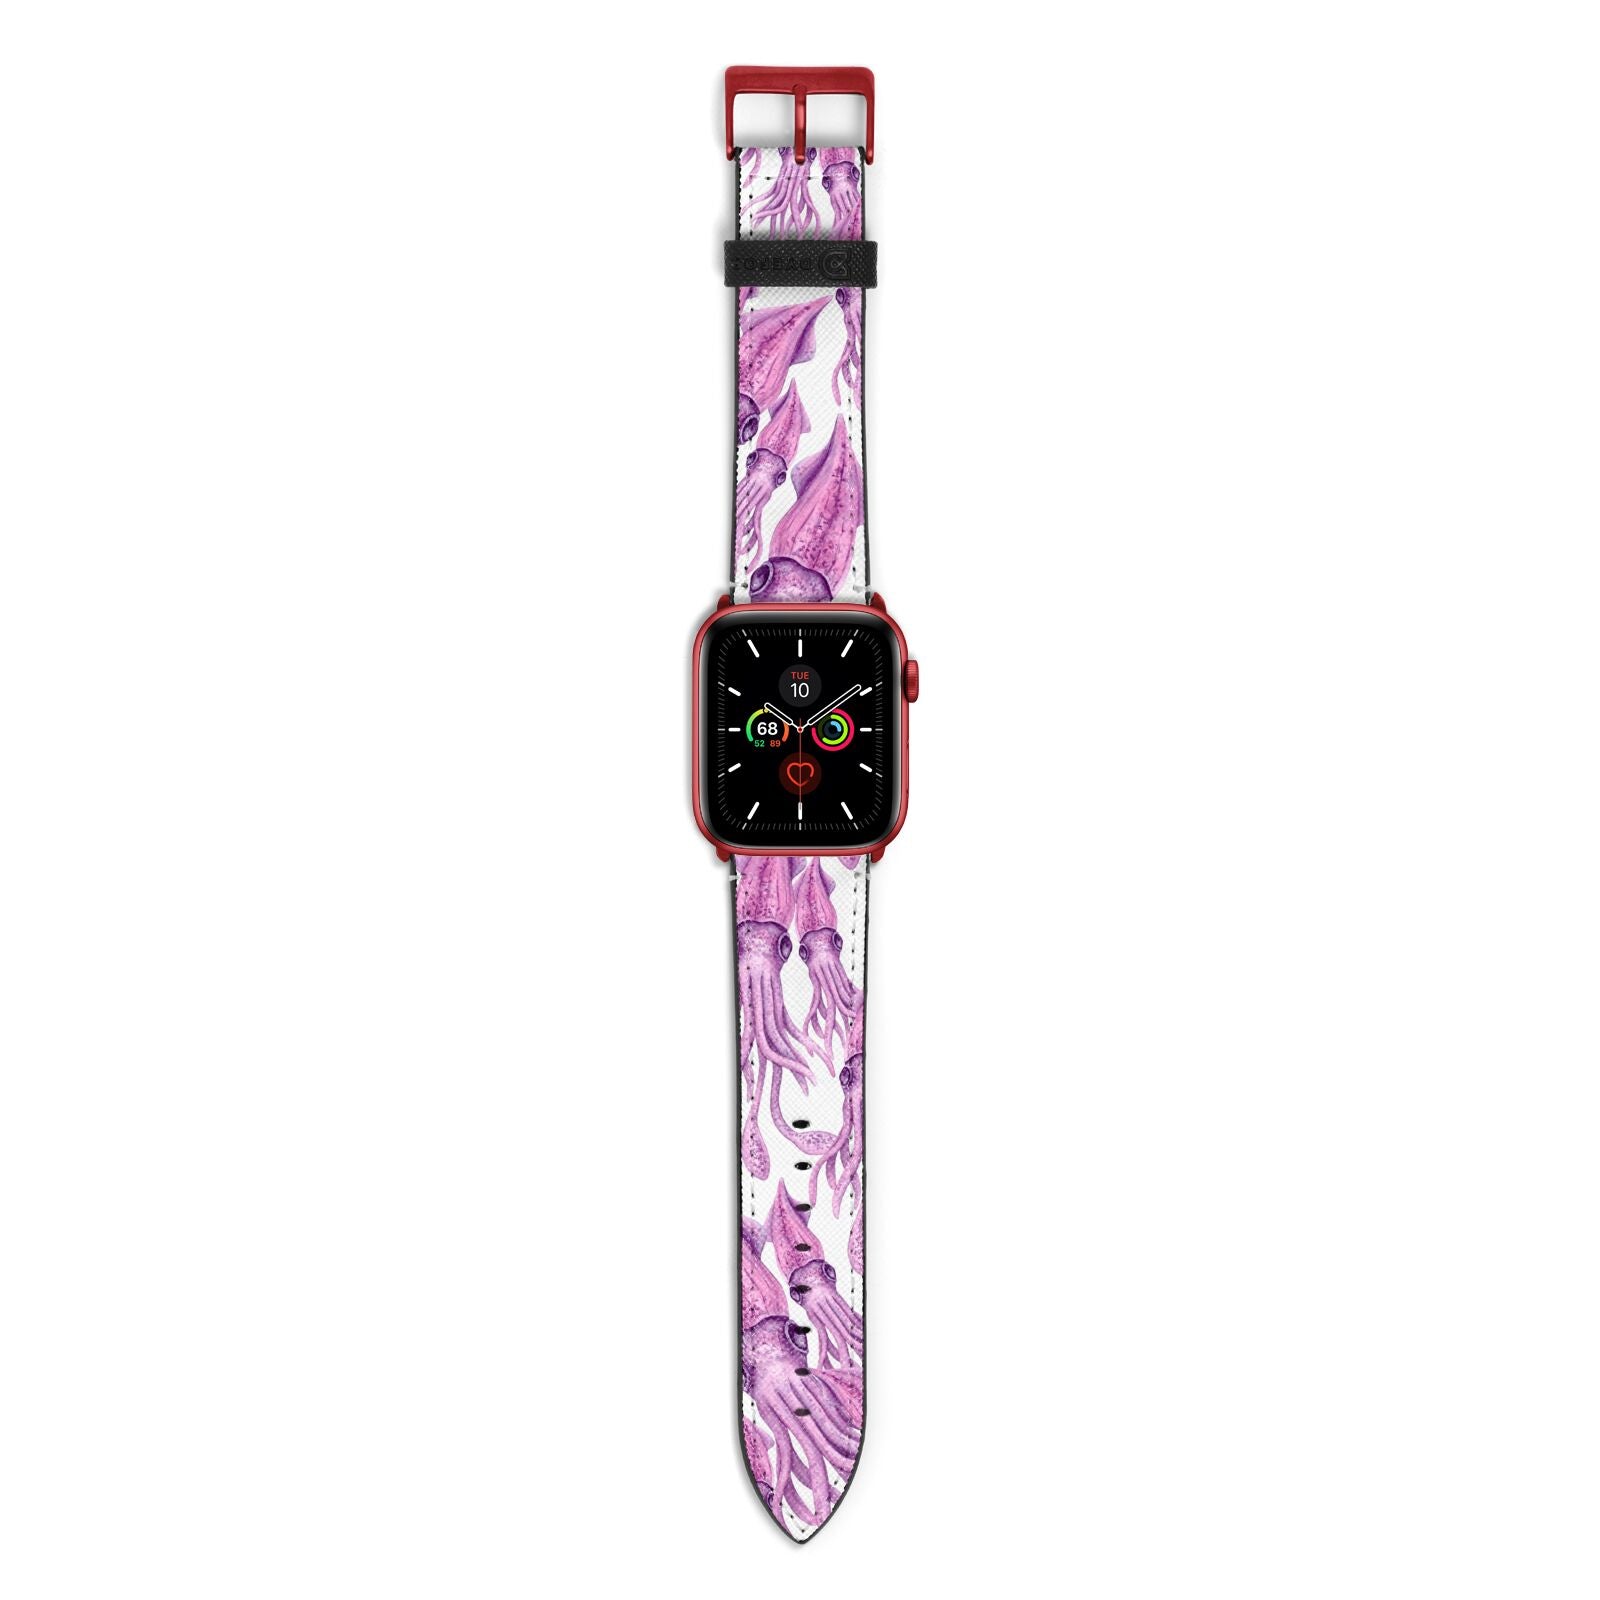 Squid Apple Watch Strap with Red Hardware